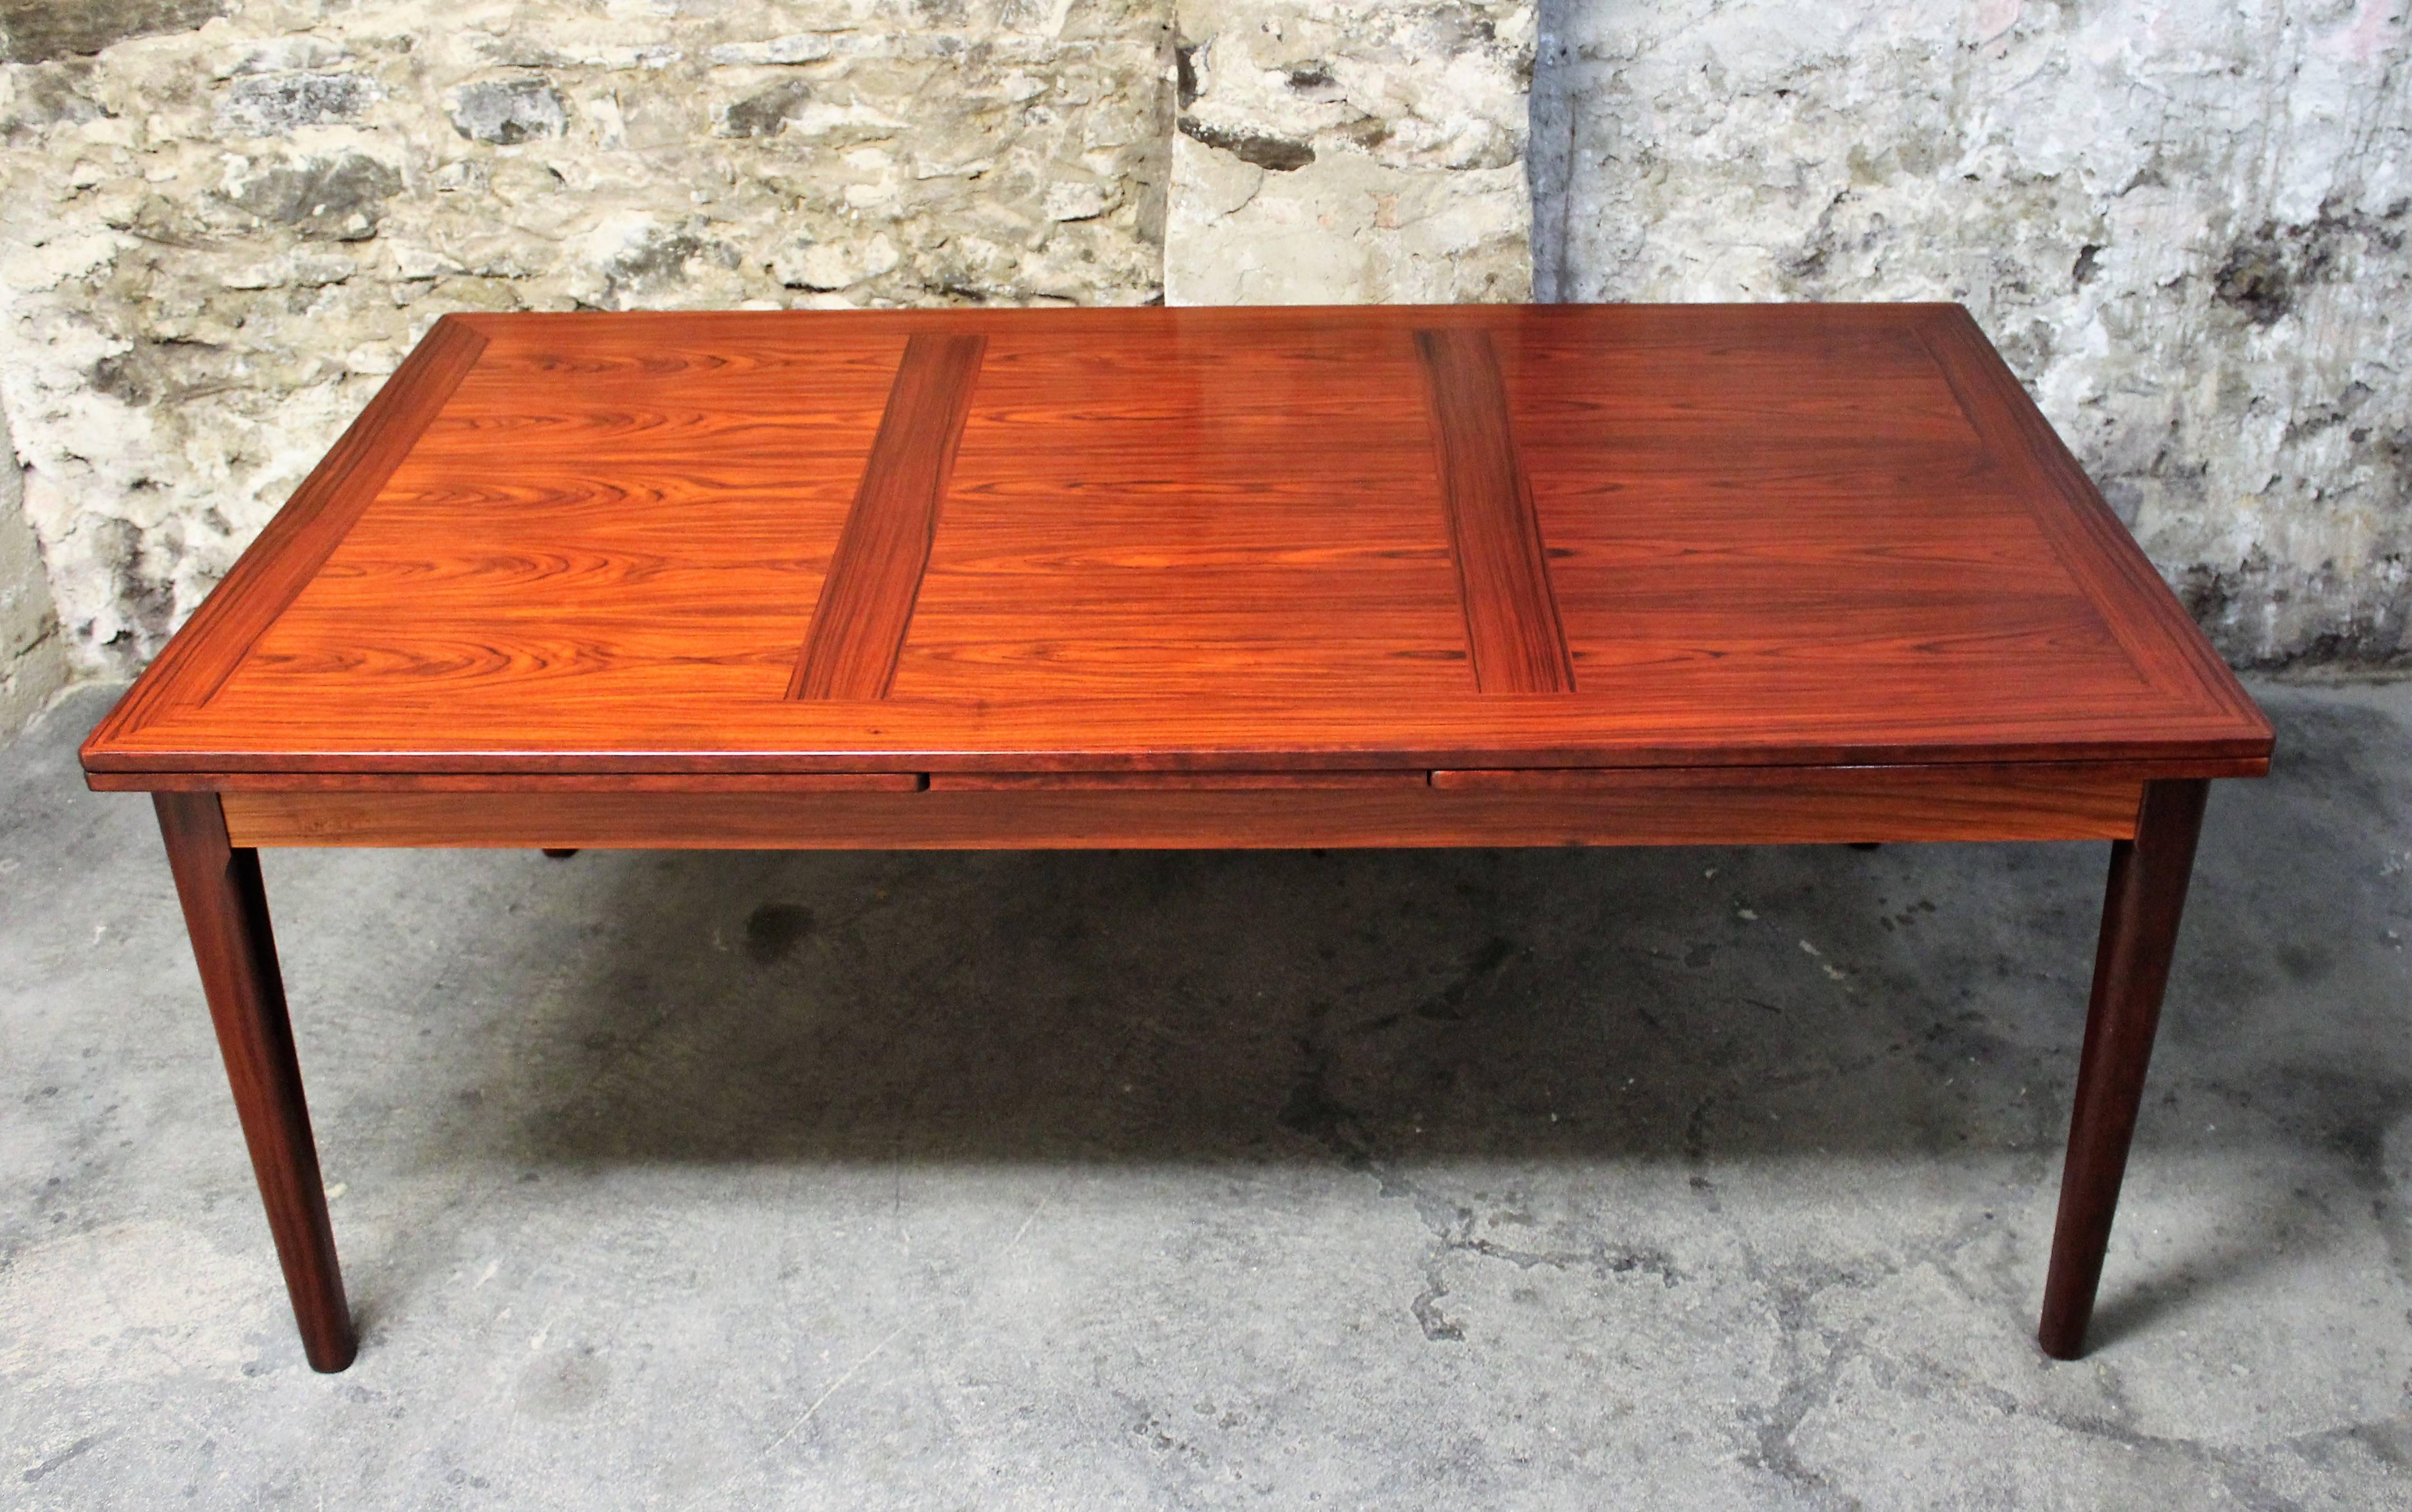 20th Century Large Danish Dining Room or Conference Table by Skovby